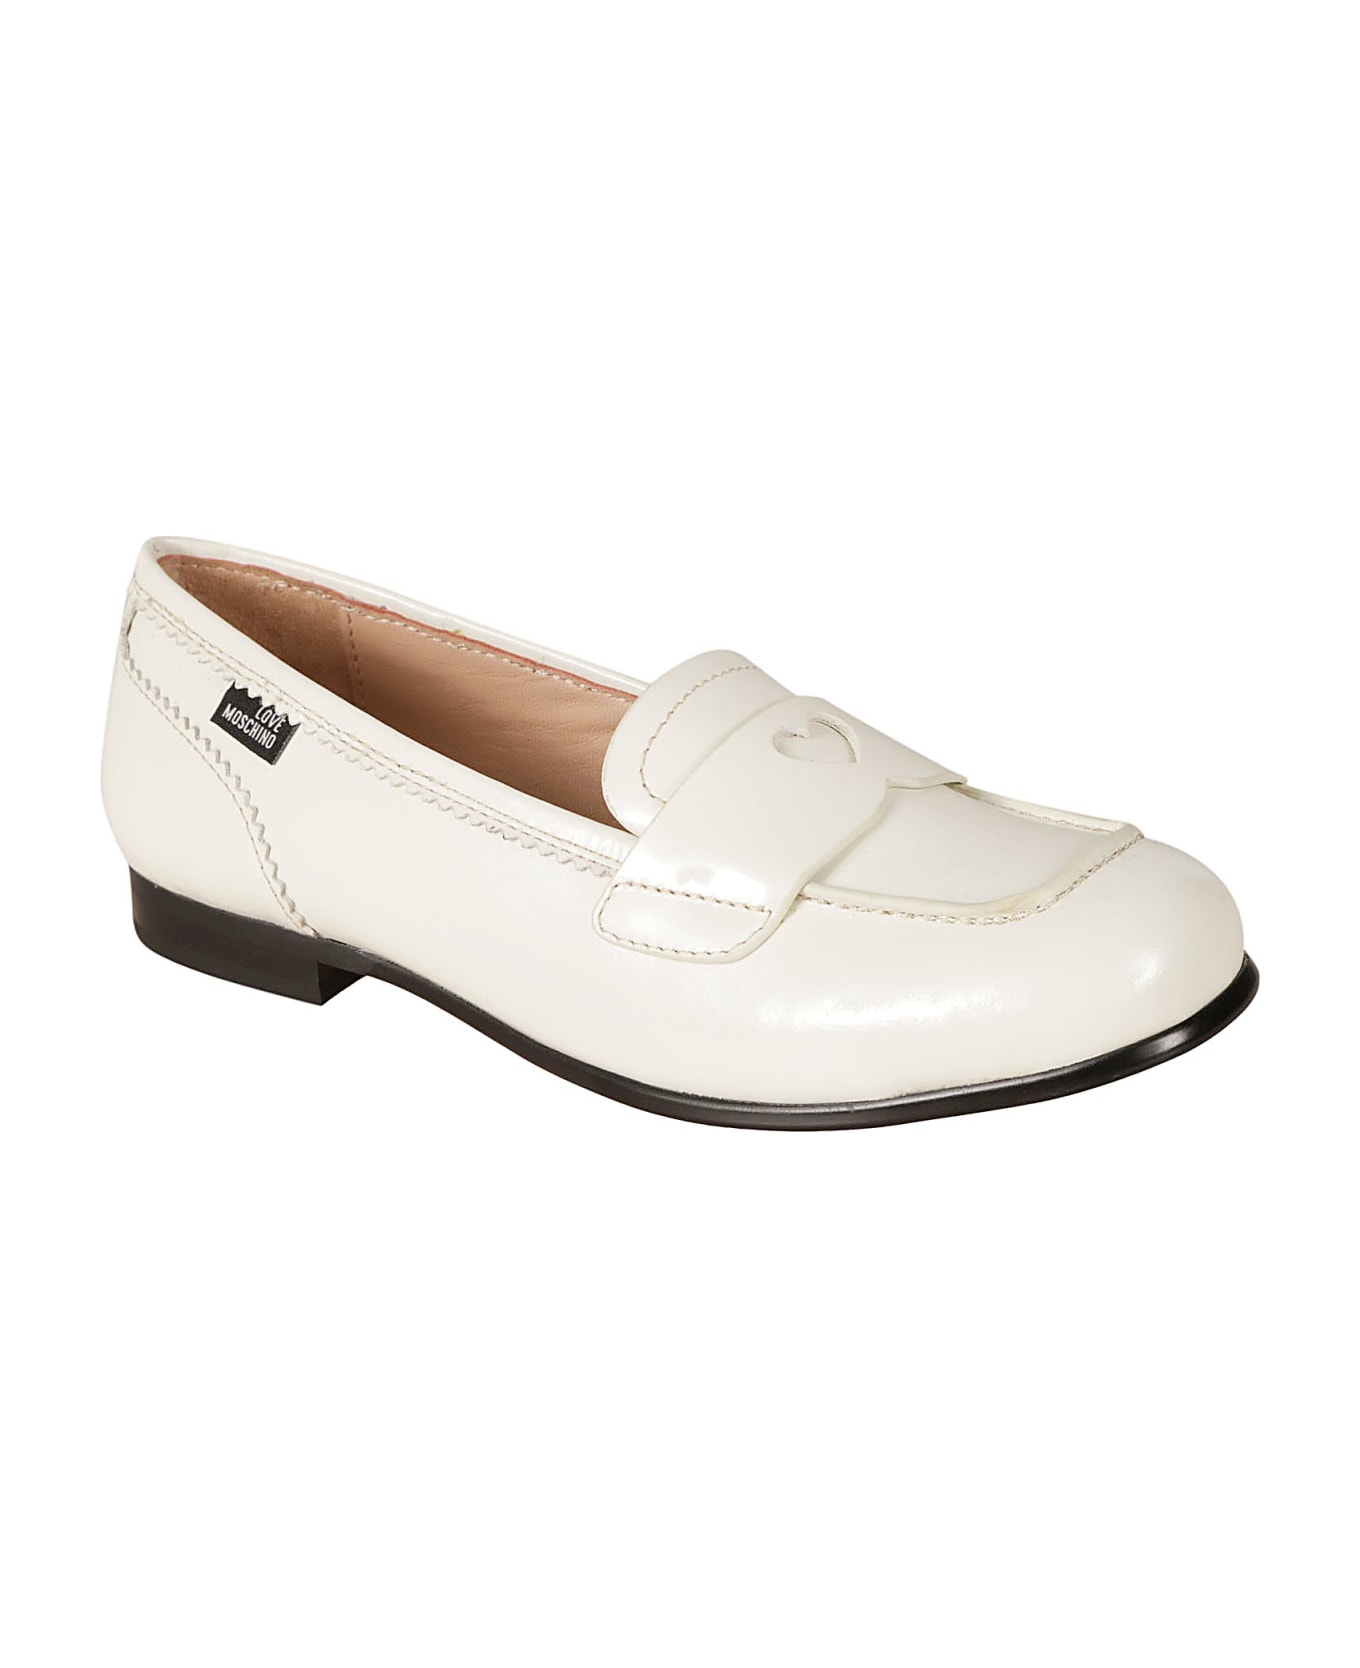 Love Moschino College15 Vernice Loafers - Latte